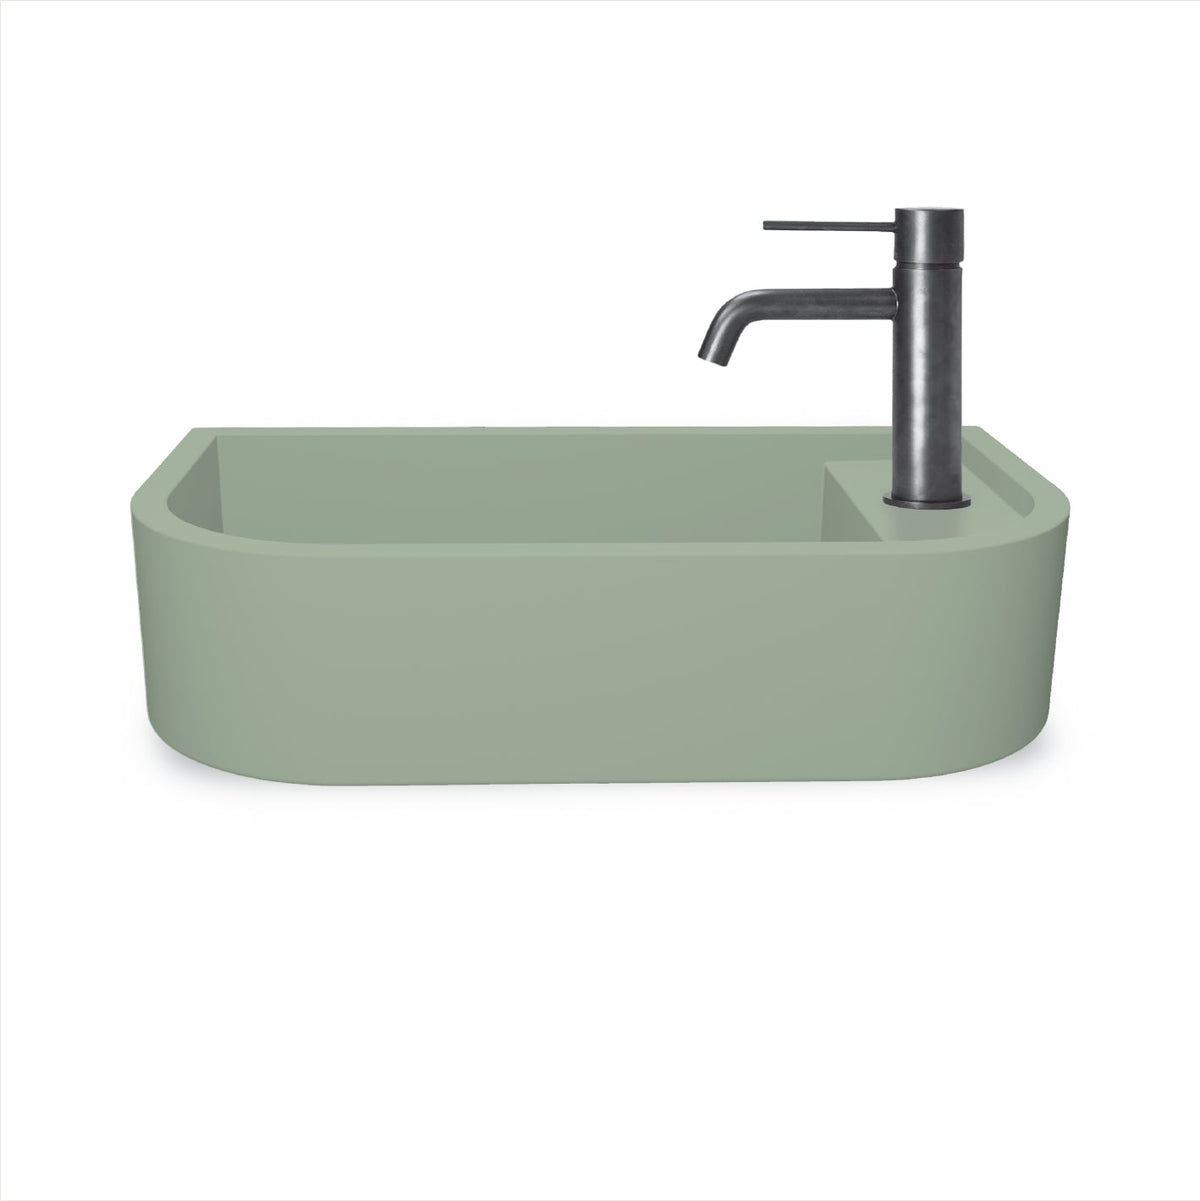 Loop 02 Basin - Overflow - Wall Hung (Mint,Tap Hole,White)